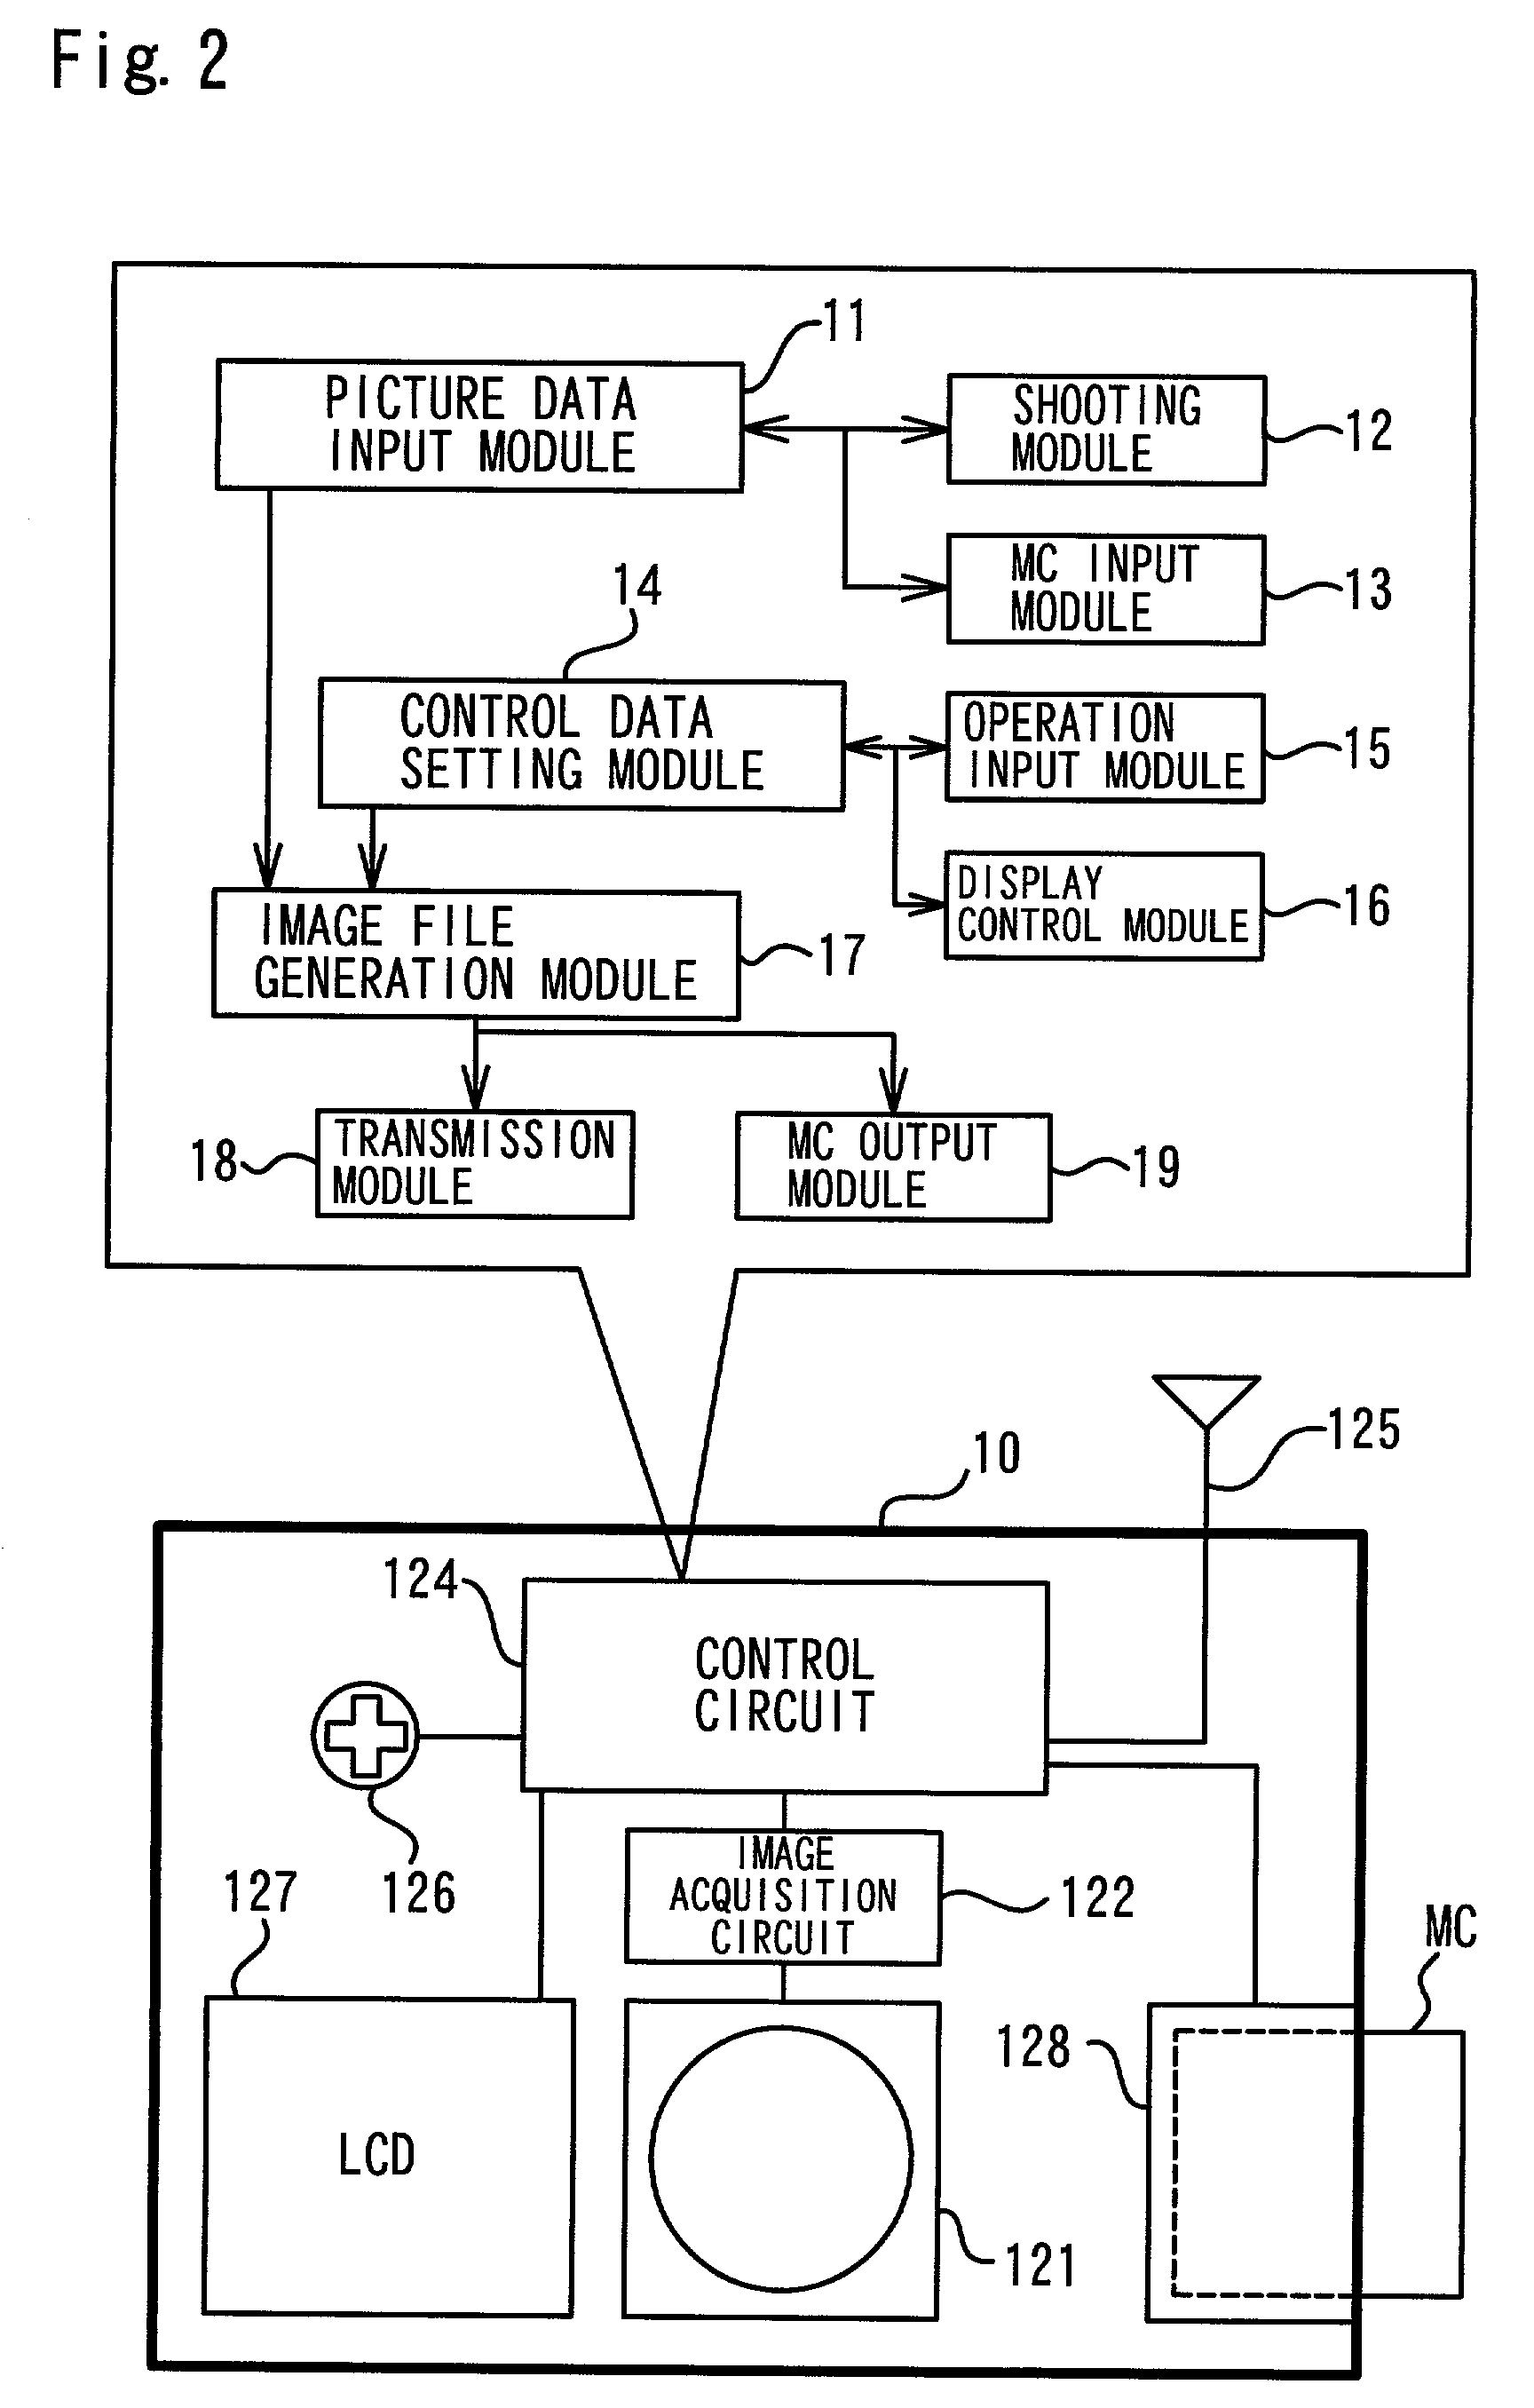 Image processing system via network